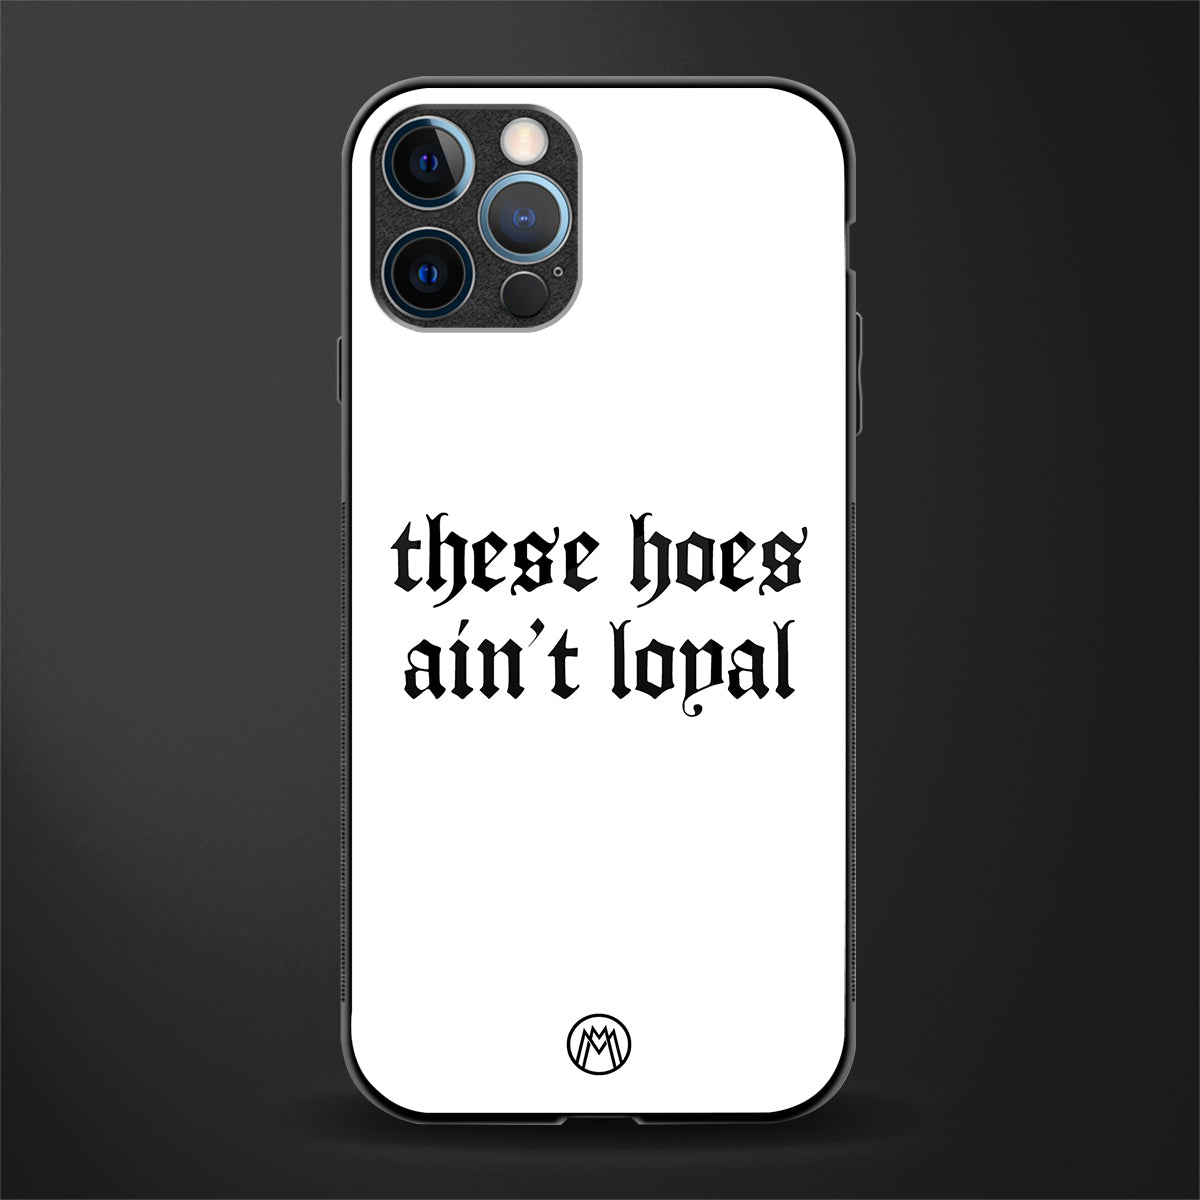 these_hoes_ain't_loyal for iphone 14 pro max image